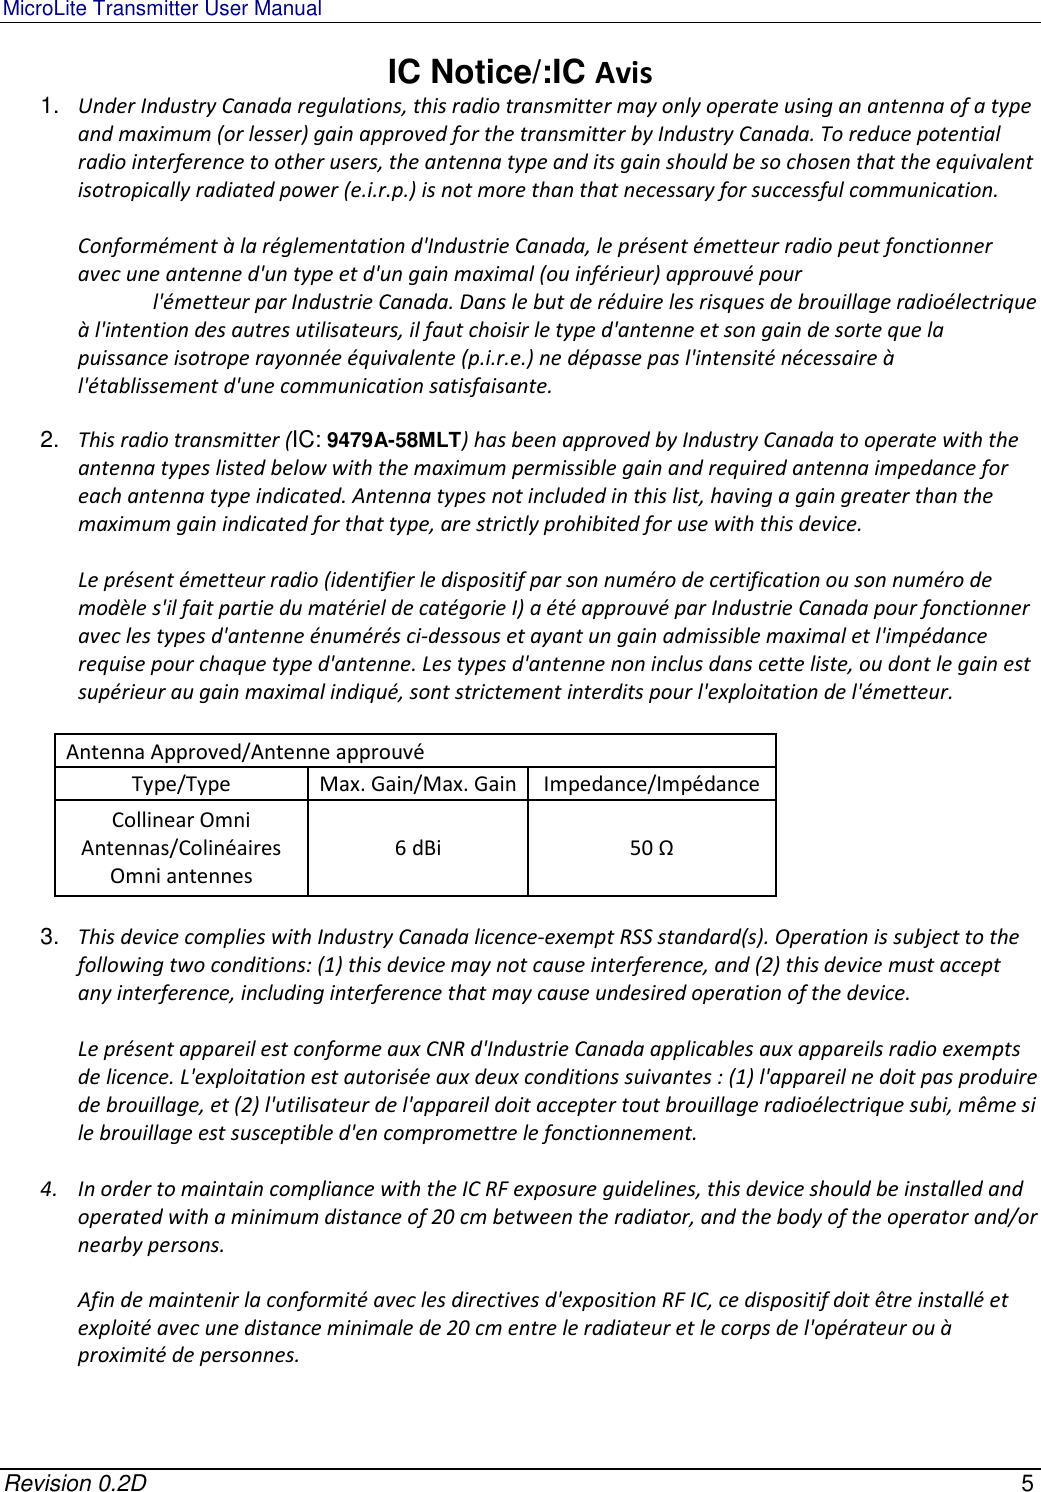 MicroLite Transmitter User Manual   Revision 0.2D    5 IC Notice/:IC Avis 1.  Under Industry Canada regulations, this radio transmitter may only operate using an antenna of a type and maximum (or lesser) gain approved for the transmitter by Industry Canada. To reduce potential radio interference to other users, the antenna type and its gain should be so chosen that the equivalent isotropically radiated power (e.i.r.p.) is not more than that necessary for successful communication.  Conformément à la réglementation d&apos;Industrie Canada, le présent émetteur radio peut fonctionner avec une antenne d&apos;un type et d&apos;un gain maximal (ou inférieur) approuvé pour   l&apos;émetteur par Industrie Canada. Dans le but de réduire les risques de brouillage radioélectrique à l&apos;intention des autres utilisateurs, il faut choisir le type d&apos;antenne et son gain de sorte que la puissance isotrope rayonnée équivalente (p.i.r.e.) ne dépasse pas l&apos;intensité nécessaire à l&apos;établissement d&apos;une communication satisfaisante.  2.  This radio transmitter (IC: 9479A-58MLT) has been approved by Industry Canada to operate with the antenna types listed below with the maximum permissible gain and required antenna impedance for each antenna type indicated. Antenna types not included in this list, having a gain greater than the maximum gain indicated for that type, are strictly prohibited for use with this device.  Le présent émetteur radio (identifier le dispositif par son numéro de certification ou son numéro de modèle s&apos;il fait partie du matériel de catégorie I) a été approuvé par Industrie Canada pour fonctionner avec les types d&apos;antenne énumérés ci-dessous et ayant un gain admissible maximal et l&apos;impédance requise pour chaque type d&apos;antenne. Les types d&apos;antenne non inclus dans cette liste, ou dont le gain est supérieur au gain maximal indiqué, sont strictement interdits pour l&apos;exploitation de l&apos;émetteur.  Antenna Approved/Antenne approuvé Type/Type  Max. Gain/Max. Gain Impedance/Impédance Collinear Omni Antennas/Colinéaires Omni antennes 6 dBi  50 Ω  3.  This device complies with Industry Canada licence-exempt RSS standard(s). Operation is subject to the following two conditions: (1) this device may not cause interference, and (2) this device must accept any interference, including interference that may cause undesired operation of the device.  Le présent appareil est conforme aux CNR d&apos;Industrie Canada applicables aux appareils radio exempts de licence. L&apos;exploitation est autorisée aux deux conditions suivantes : (1) l&apos;appareil ne doit pas produire de brouillage, et (2) l&apos;utilisateur de l&apos;appareil doit accepter tout brouillage radioélectrique subi, même si le brouillage est susceptible d&apos;en compromettre le fonctionnement.  4. In order to maintain compliance with the IC RF exposure guidelines, this device should be installed and operated with a minimum distance of 20 cm between the radiator, and the body of the operator and/or nearby persons.  Afin de maintenir la conformité avec les directives d&apos;exposition RF IC, ce dispositif doit être installé et exploité avec une distance minimale de 20 cm entre le radiateur et le corps de l&apos;opérateur ou à proximité de personnes.   